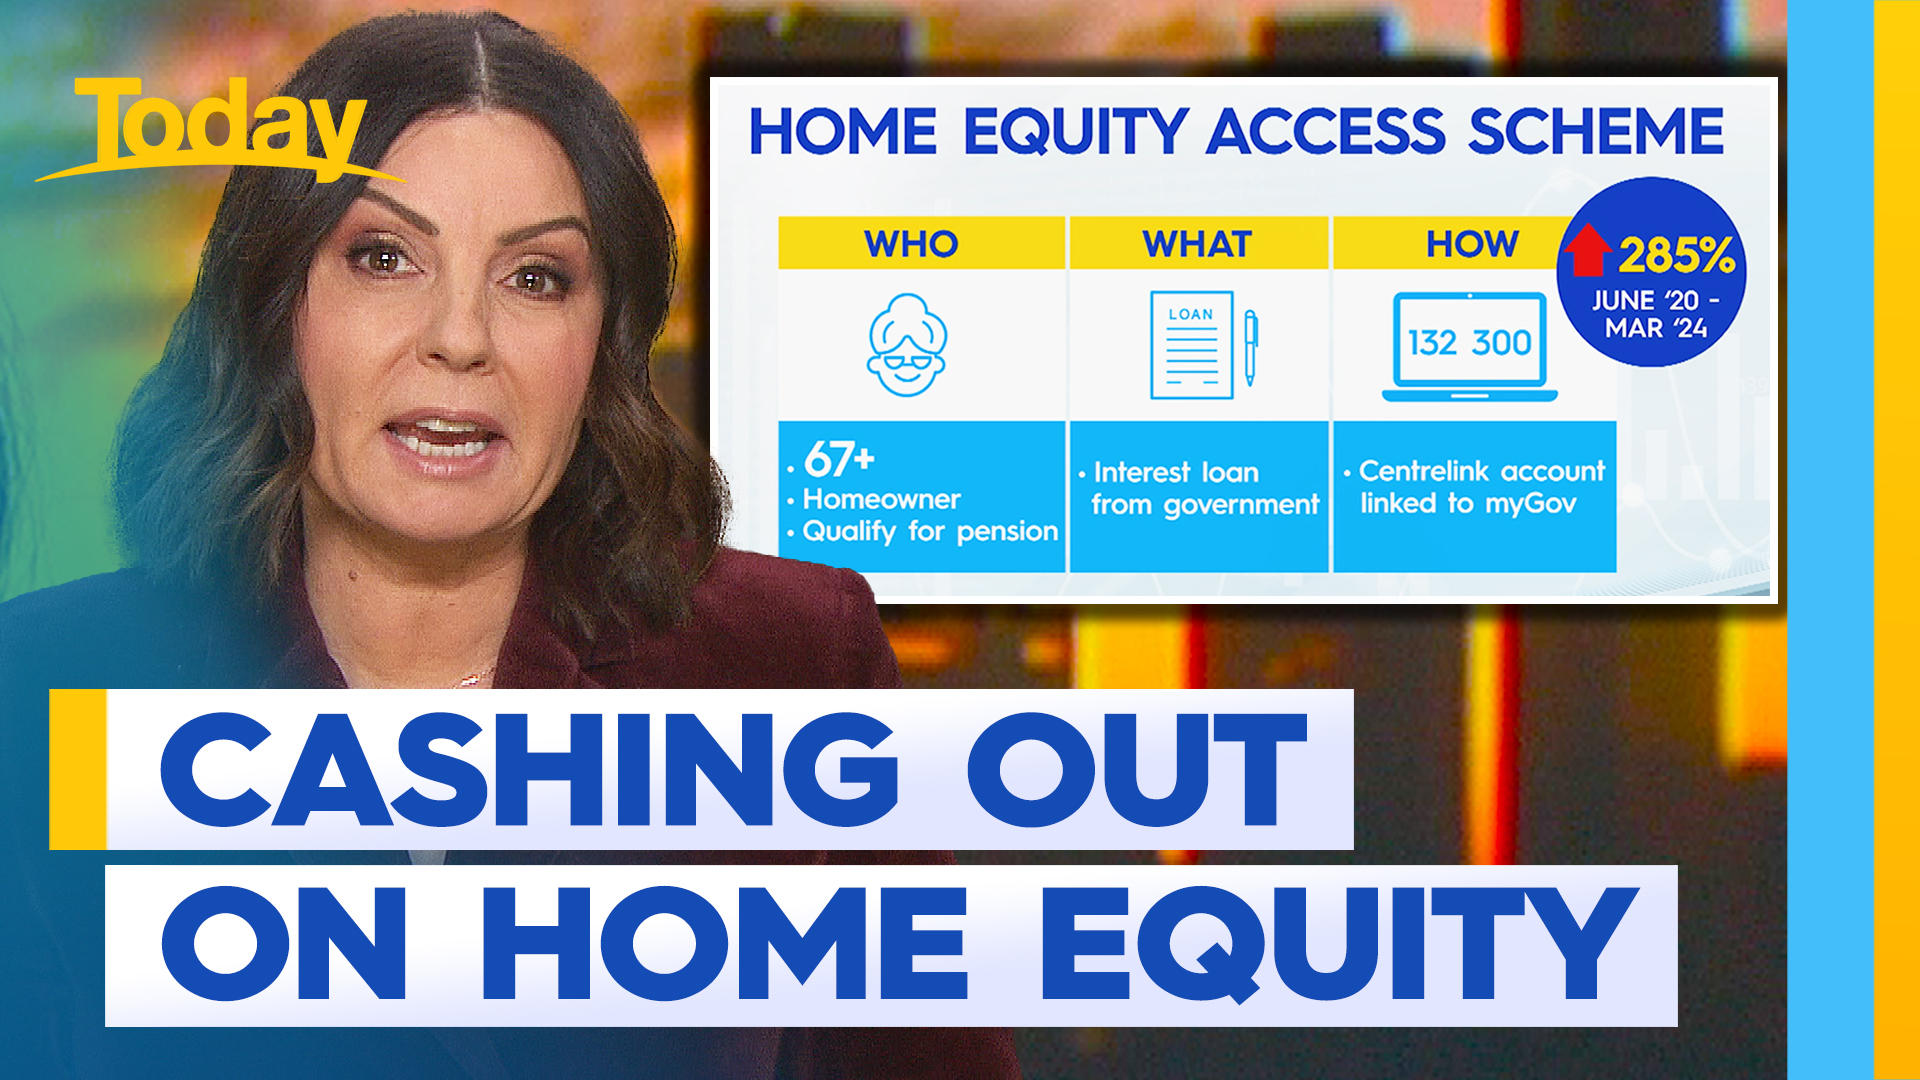 More Aussies opting to cash out their home equity